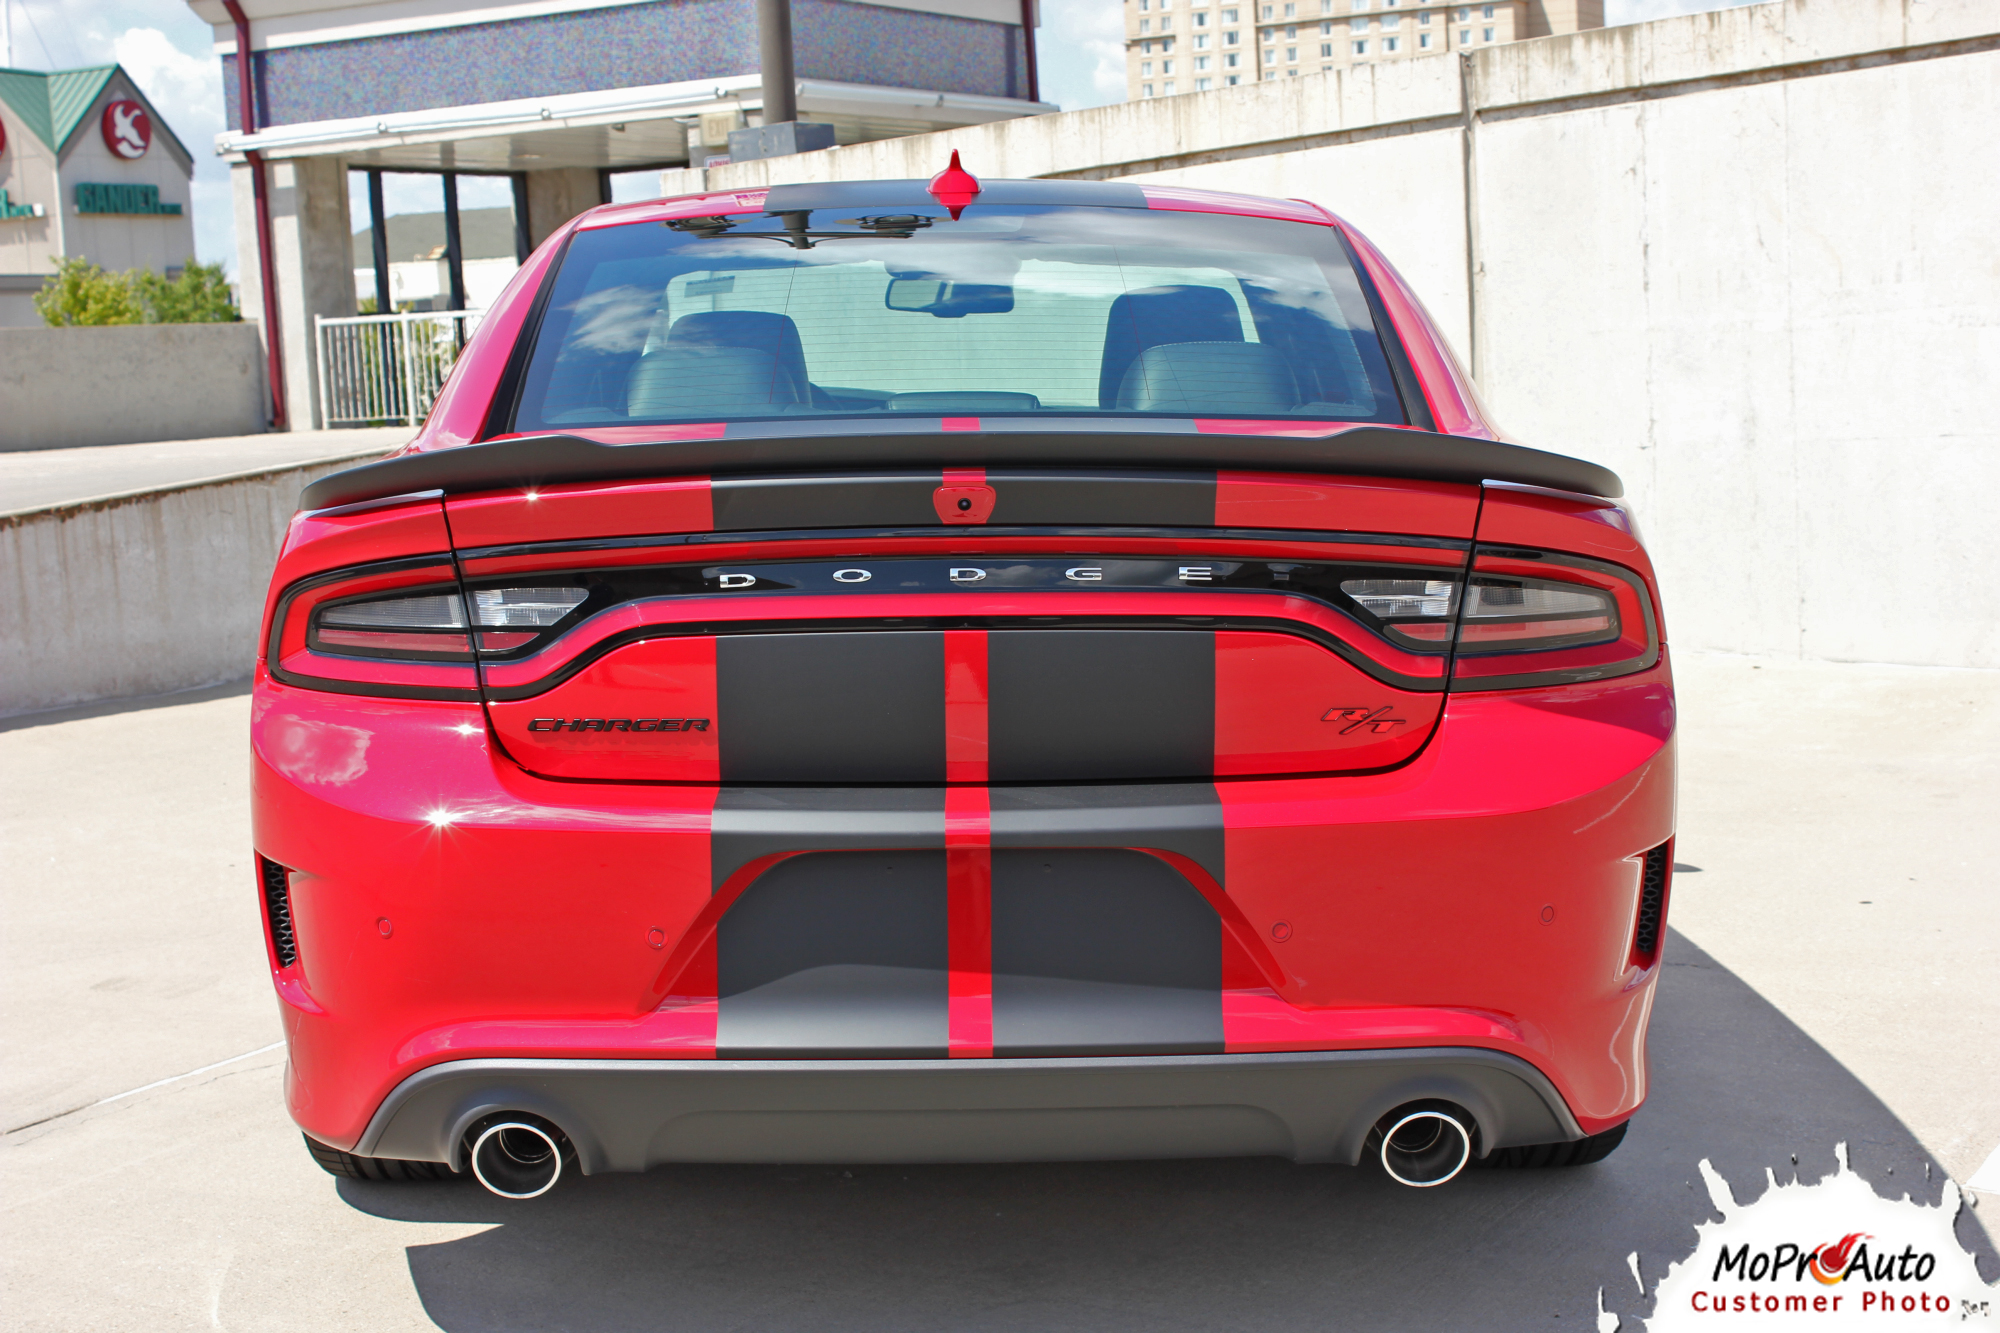 2015, 2016, 2017, 2018, 2019, 2020, 2021, 2022 RT SCAT PACK SRT 392 HELLCAT Rally Racing Stripes Dodge Charger Vinyl Graphics, Striping and Decals Set